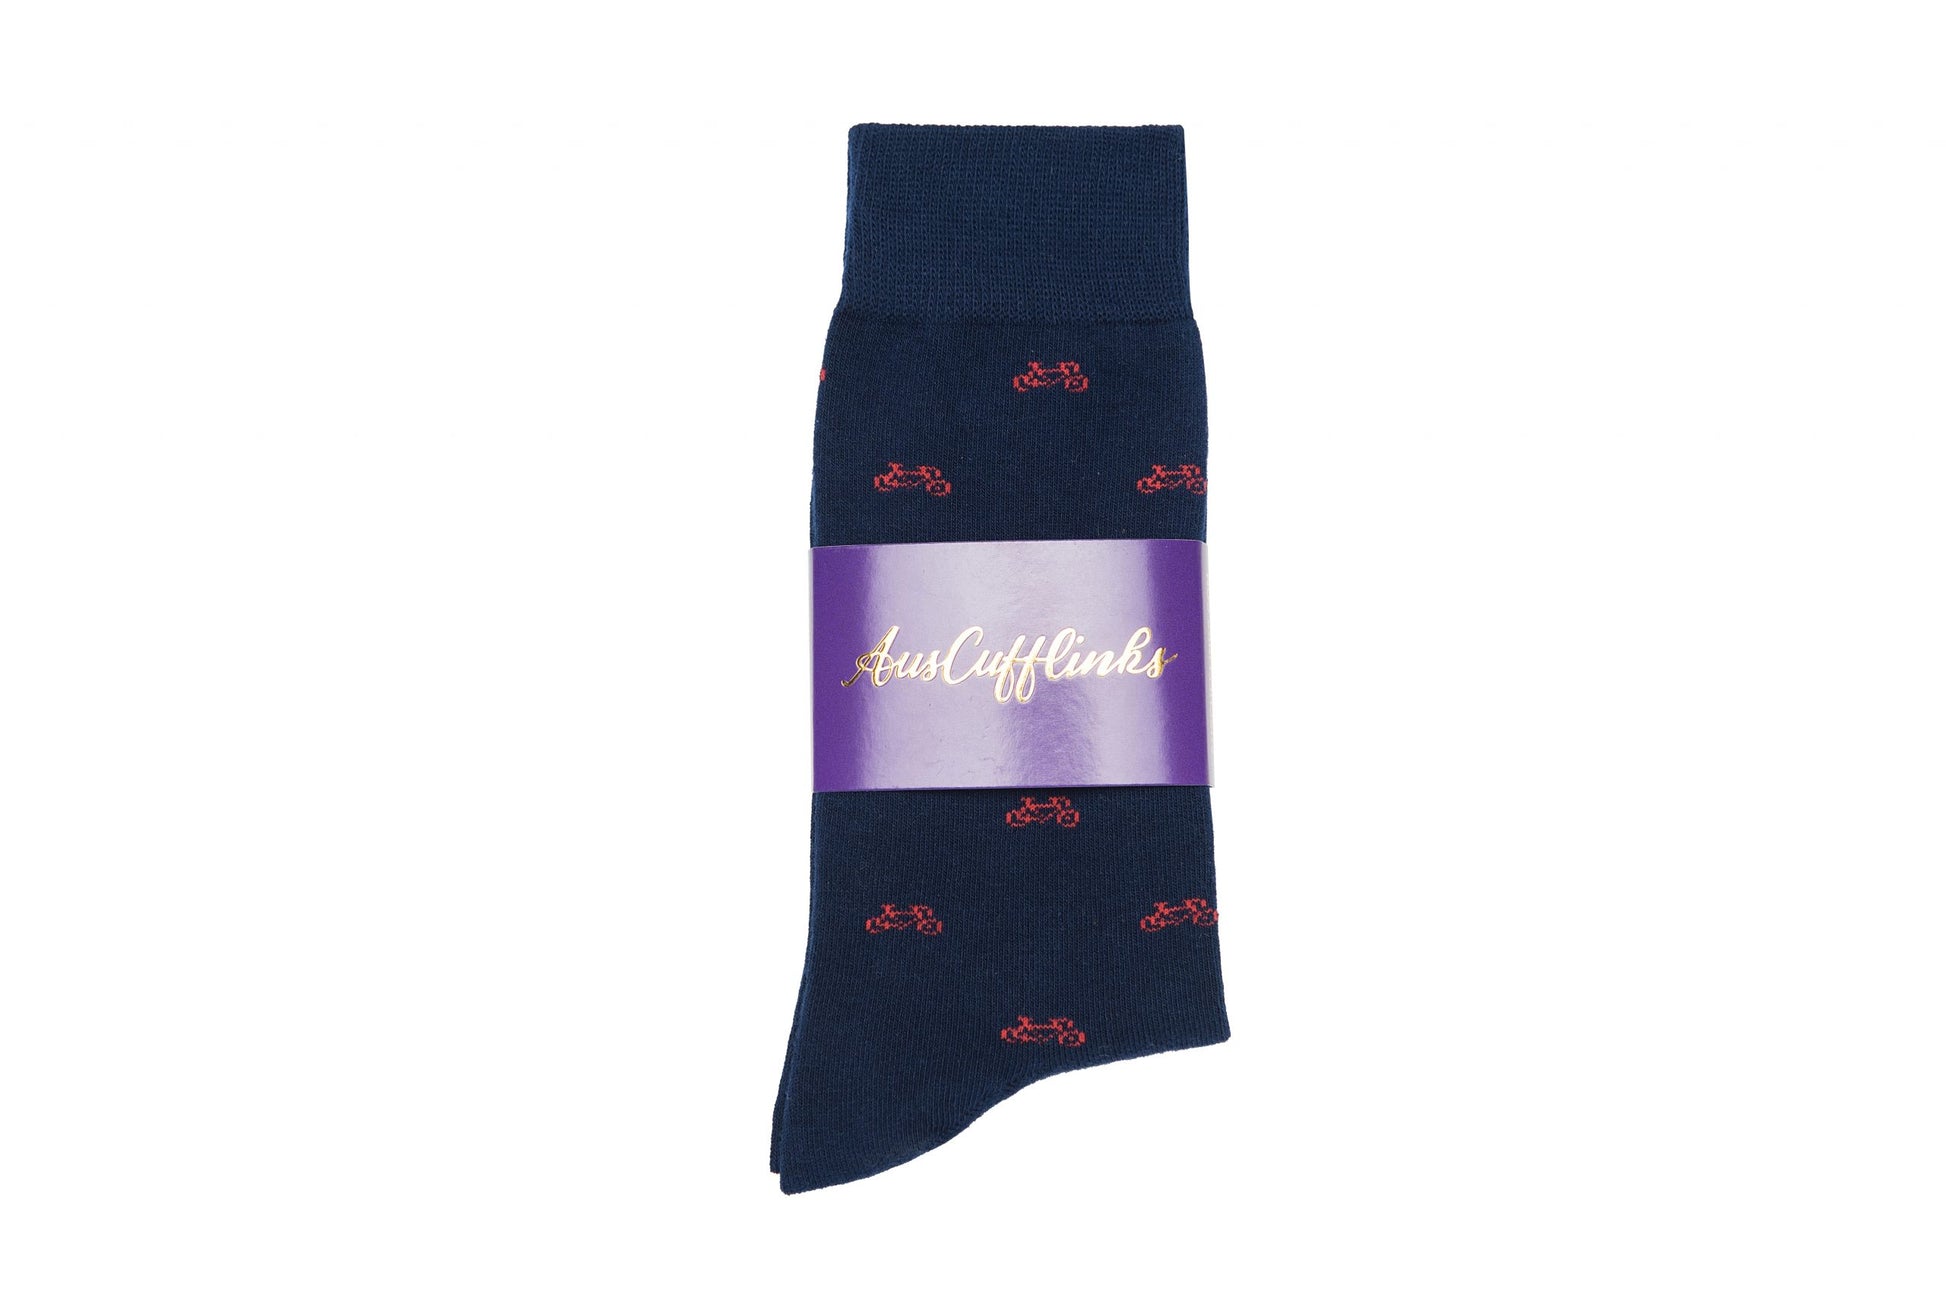 A Cyclist Bike Sock with a red and blue design is available.